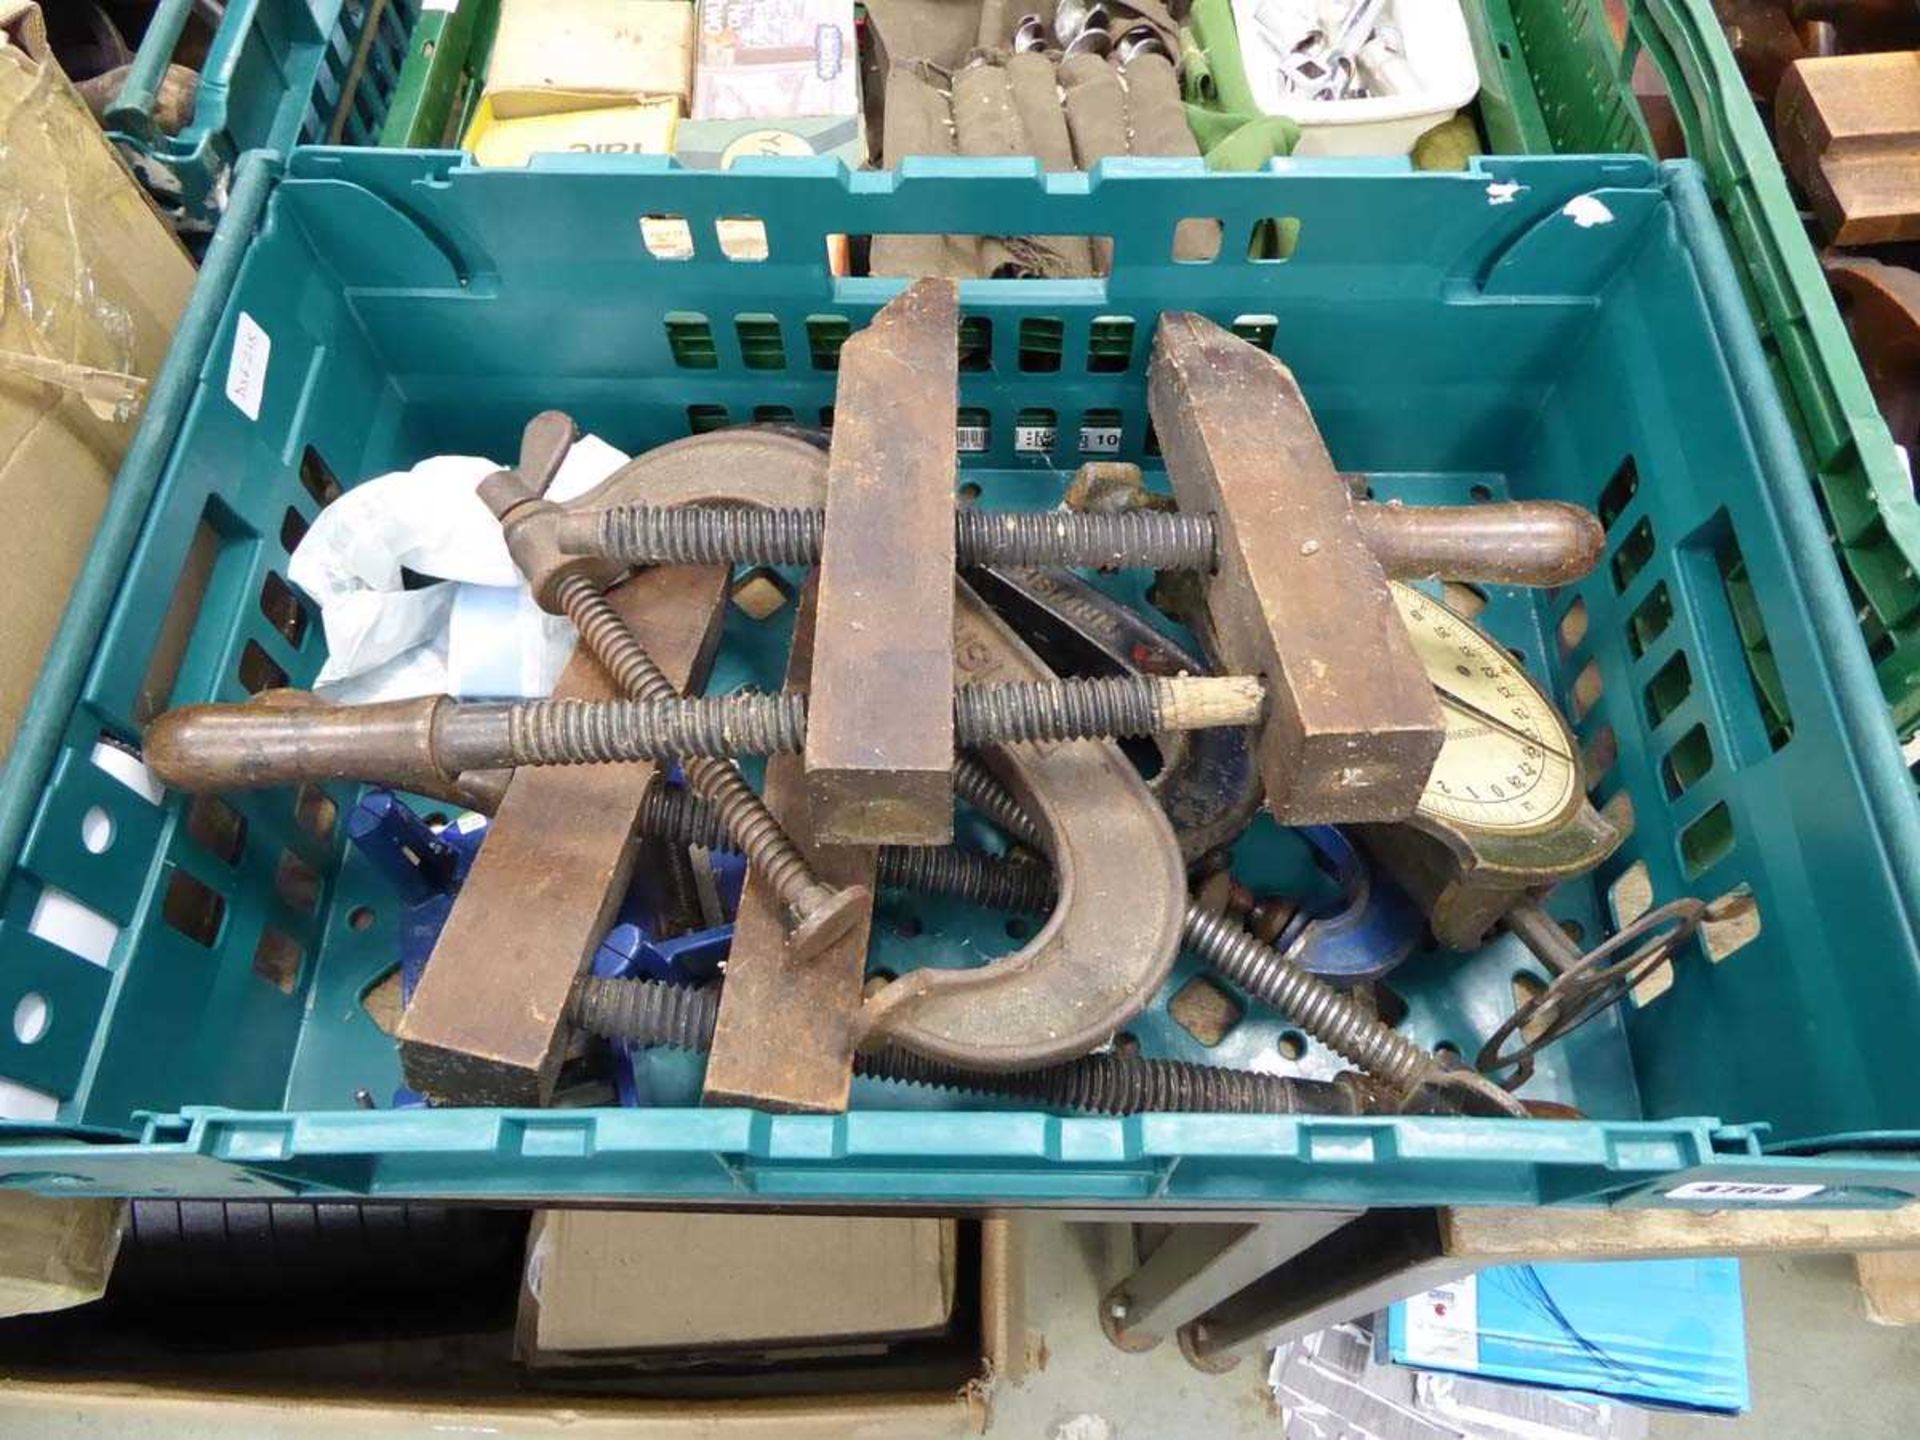 Box containing G clamps, wooden clamps, scales, etc